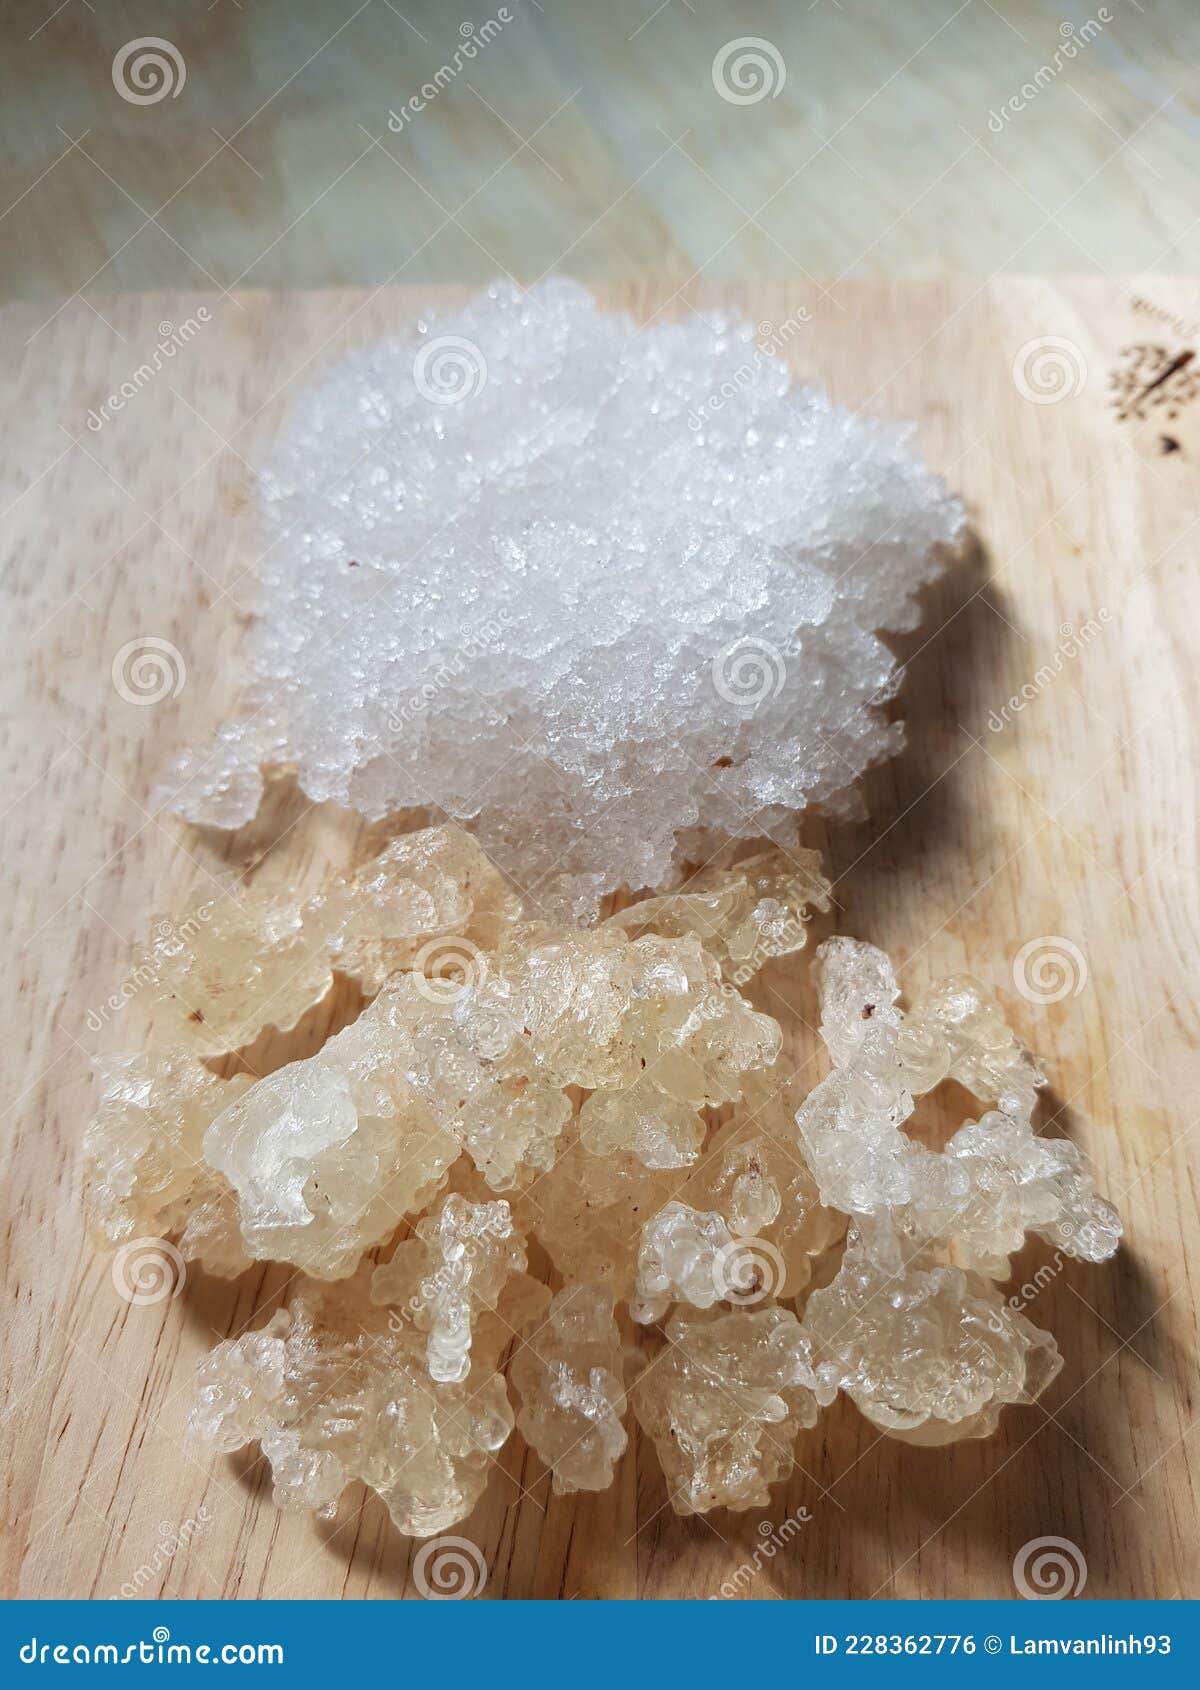 Tragacanth is a natural gum obtained from the dried sap of several species  of Middle Eastern.Gum Tragacanth (snow bird nest) was cooked many dishes  such as: sweet soup, Stock Photo